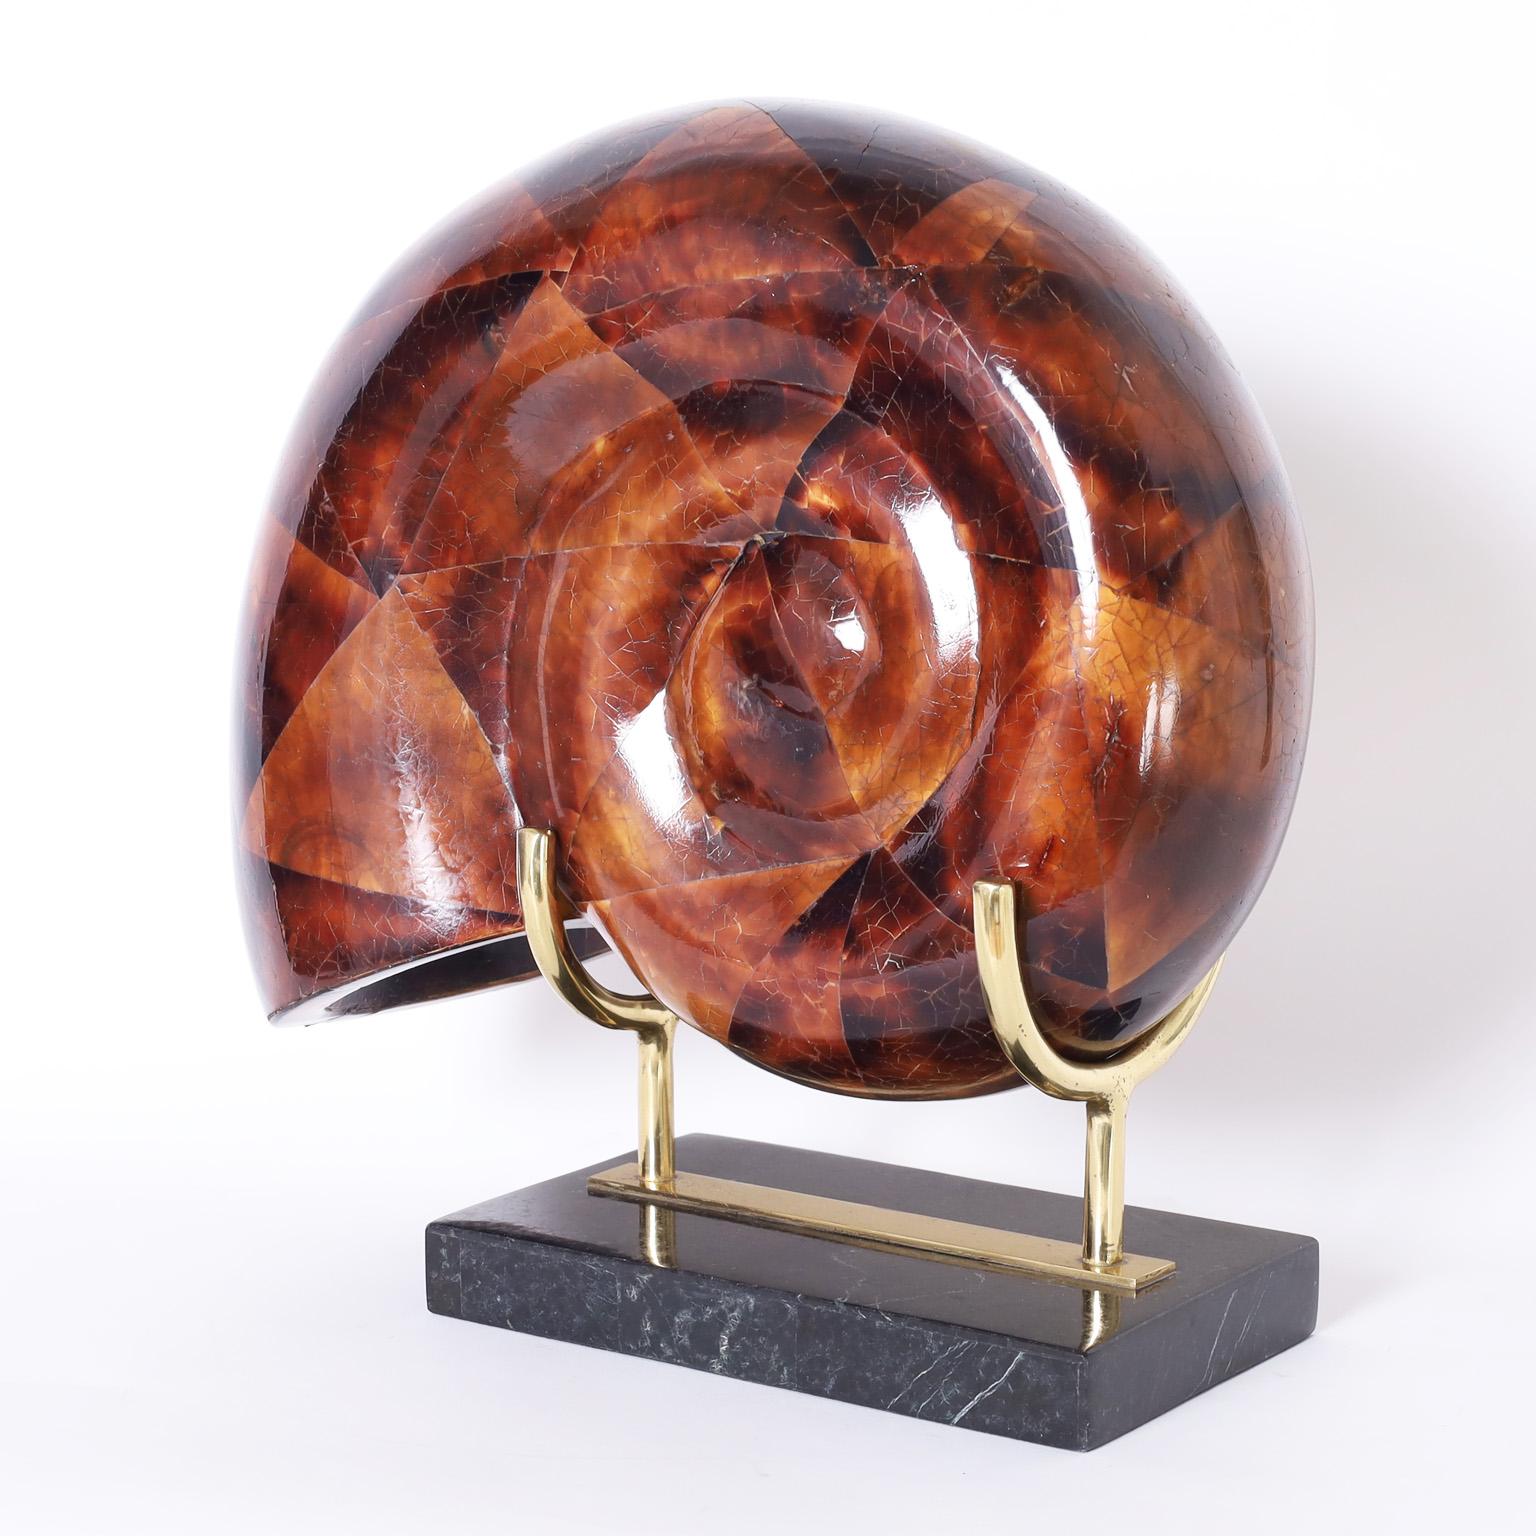 Eye catching vintage nautilus sculpture crafted in penshell and presented on a brass and stone stand by Maitland-Smith.